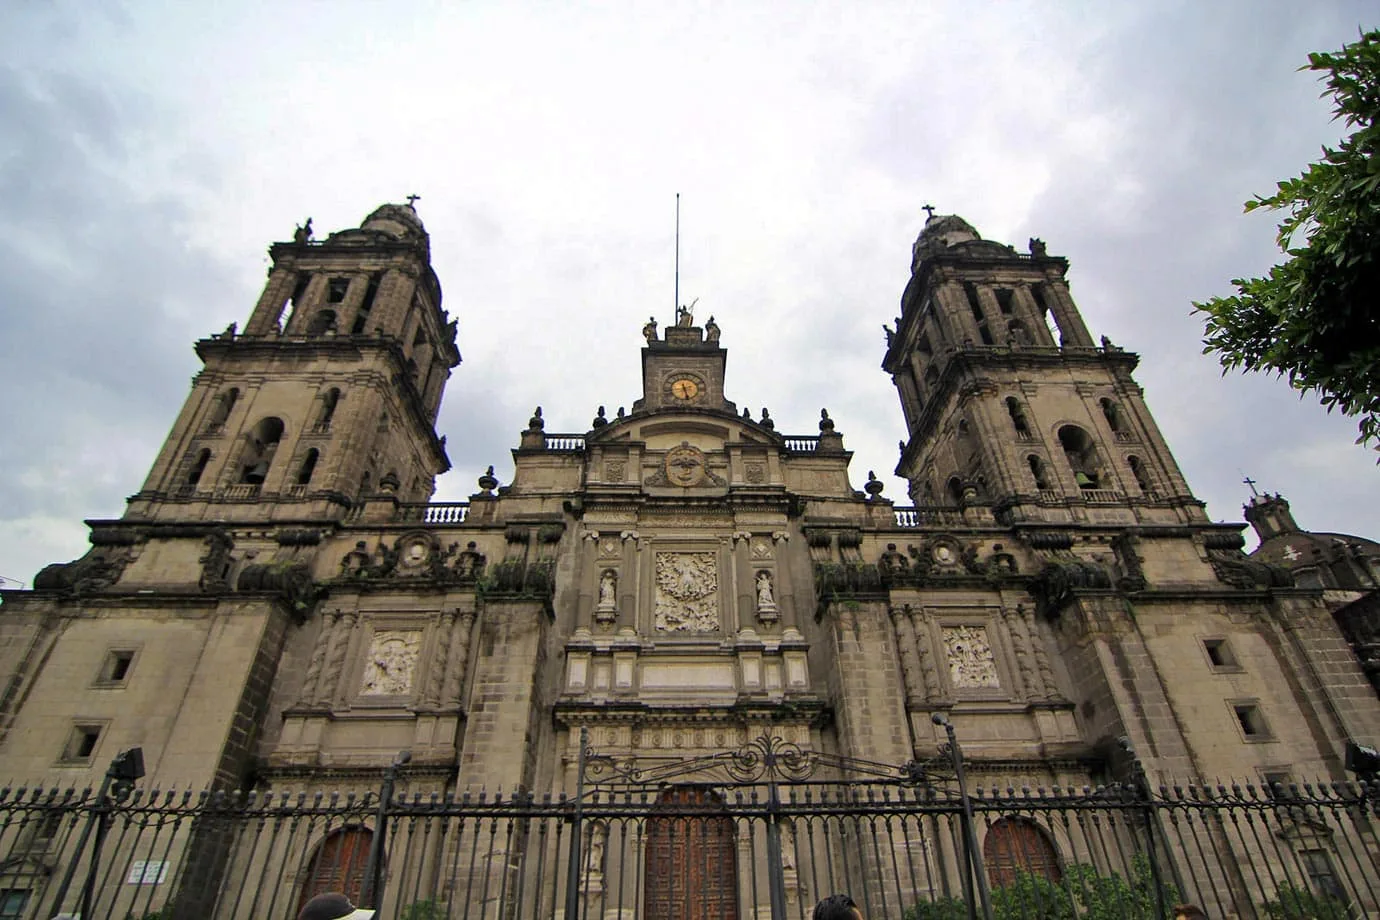 Mexico City Metropolitan Cathedral in the middle of the Zocalo, the central plaza